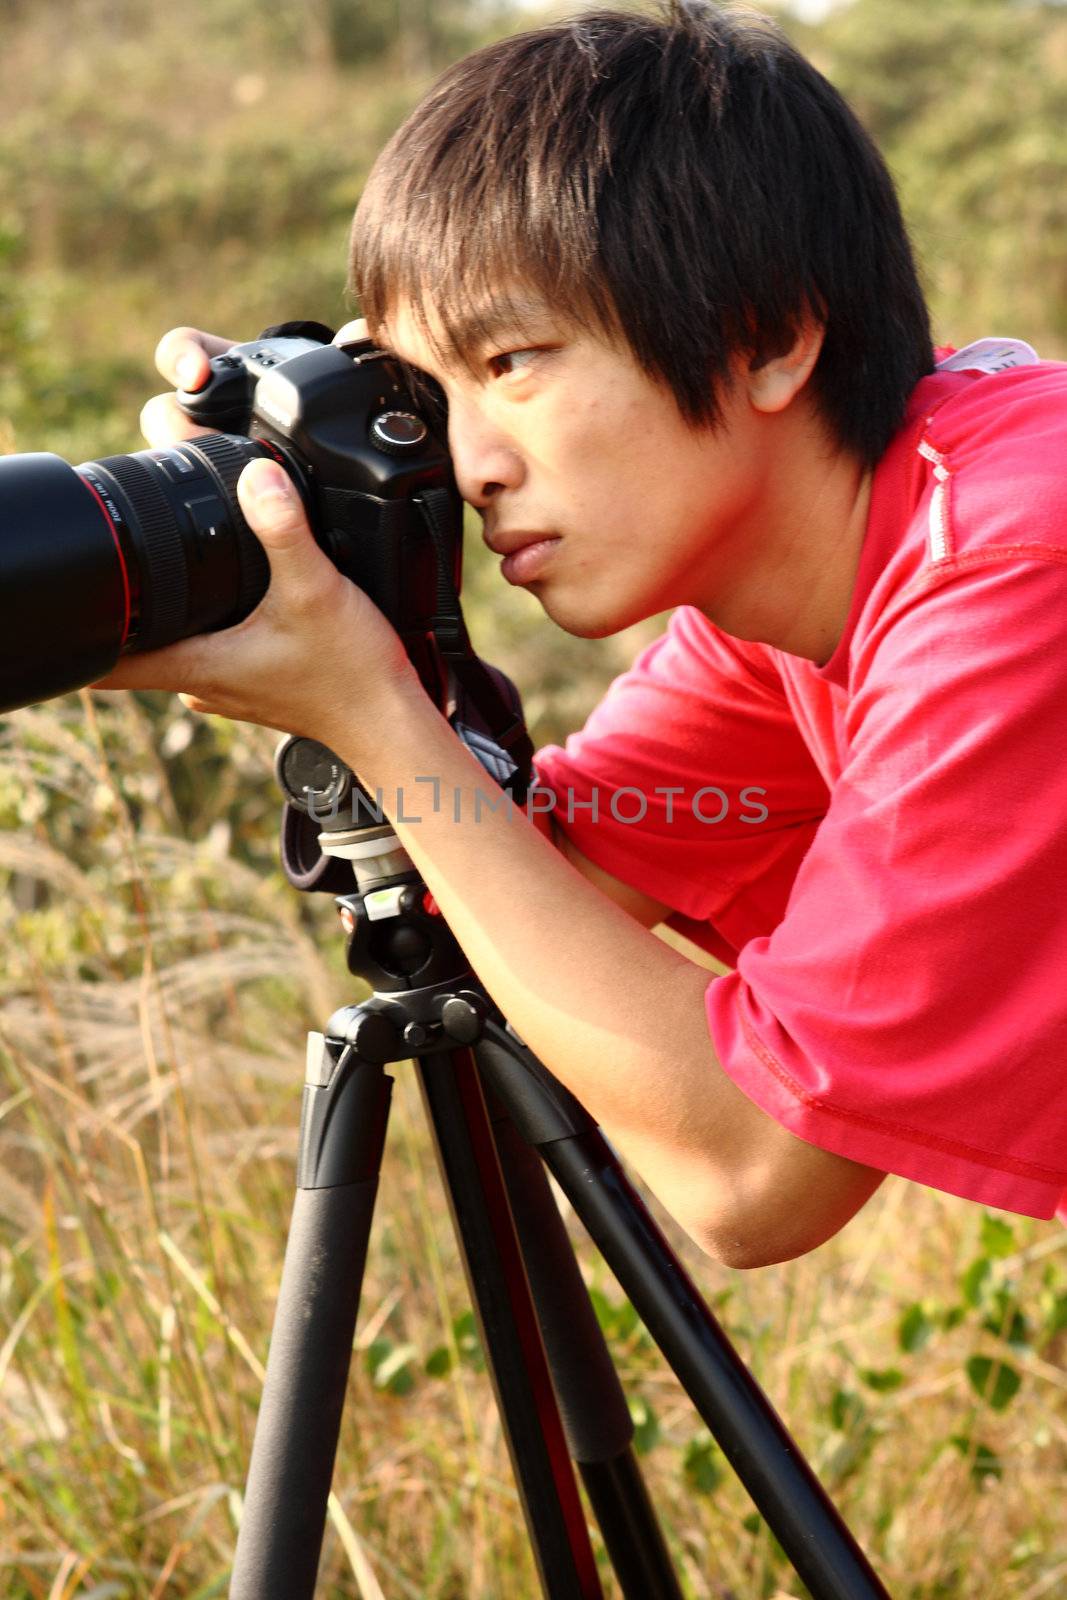 photographer with the camera on a tripod. On a background yellow grass